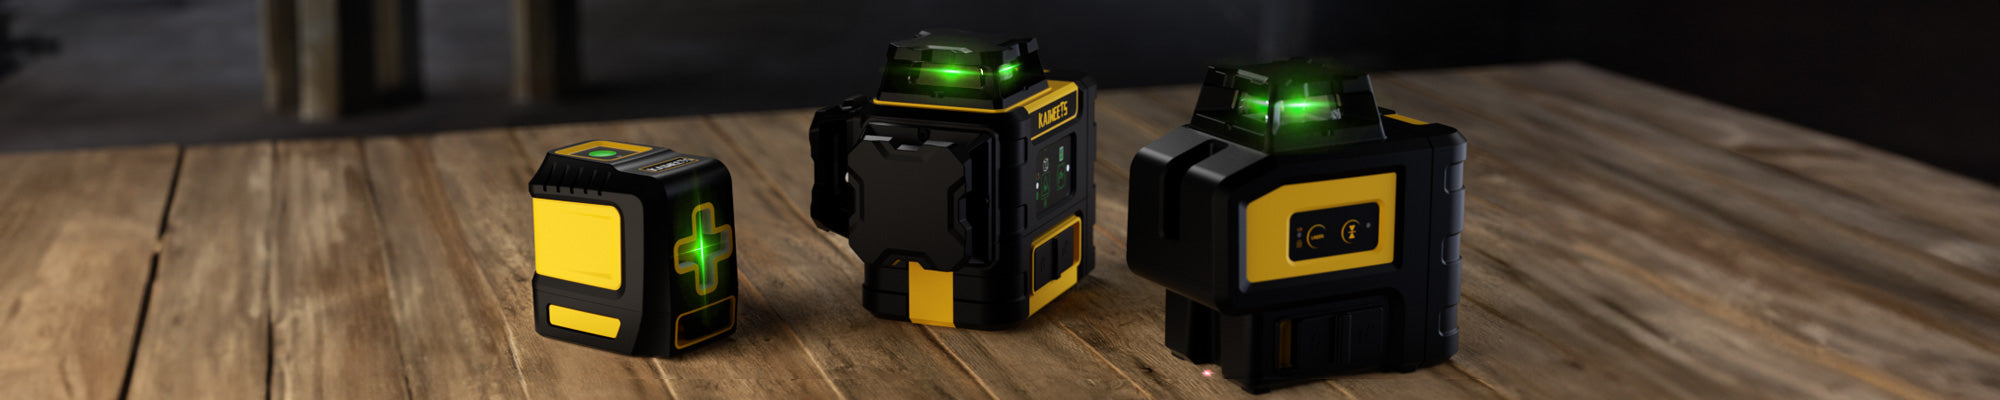 kaiweets-Laser Level & Accessories